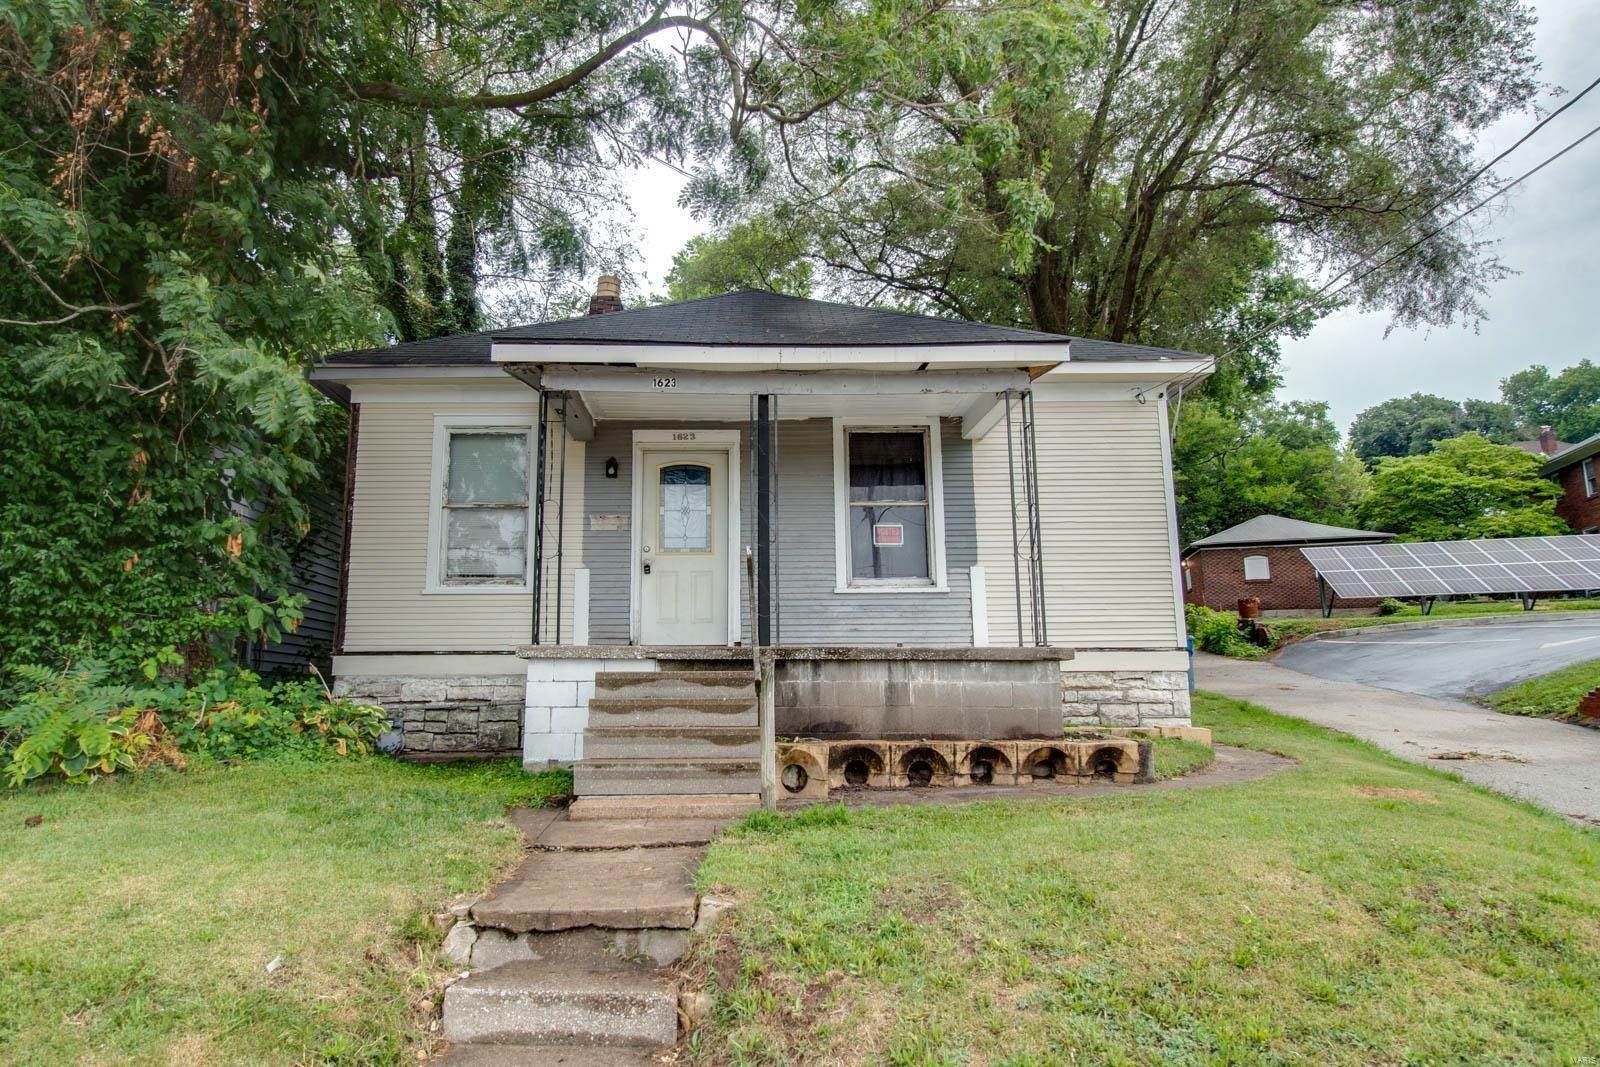 Property for Sale at 1623 Walker Street Alton, Illinois 62002 United States